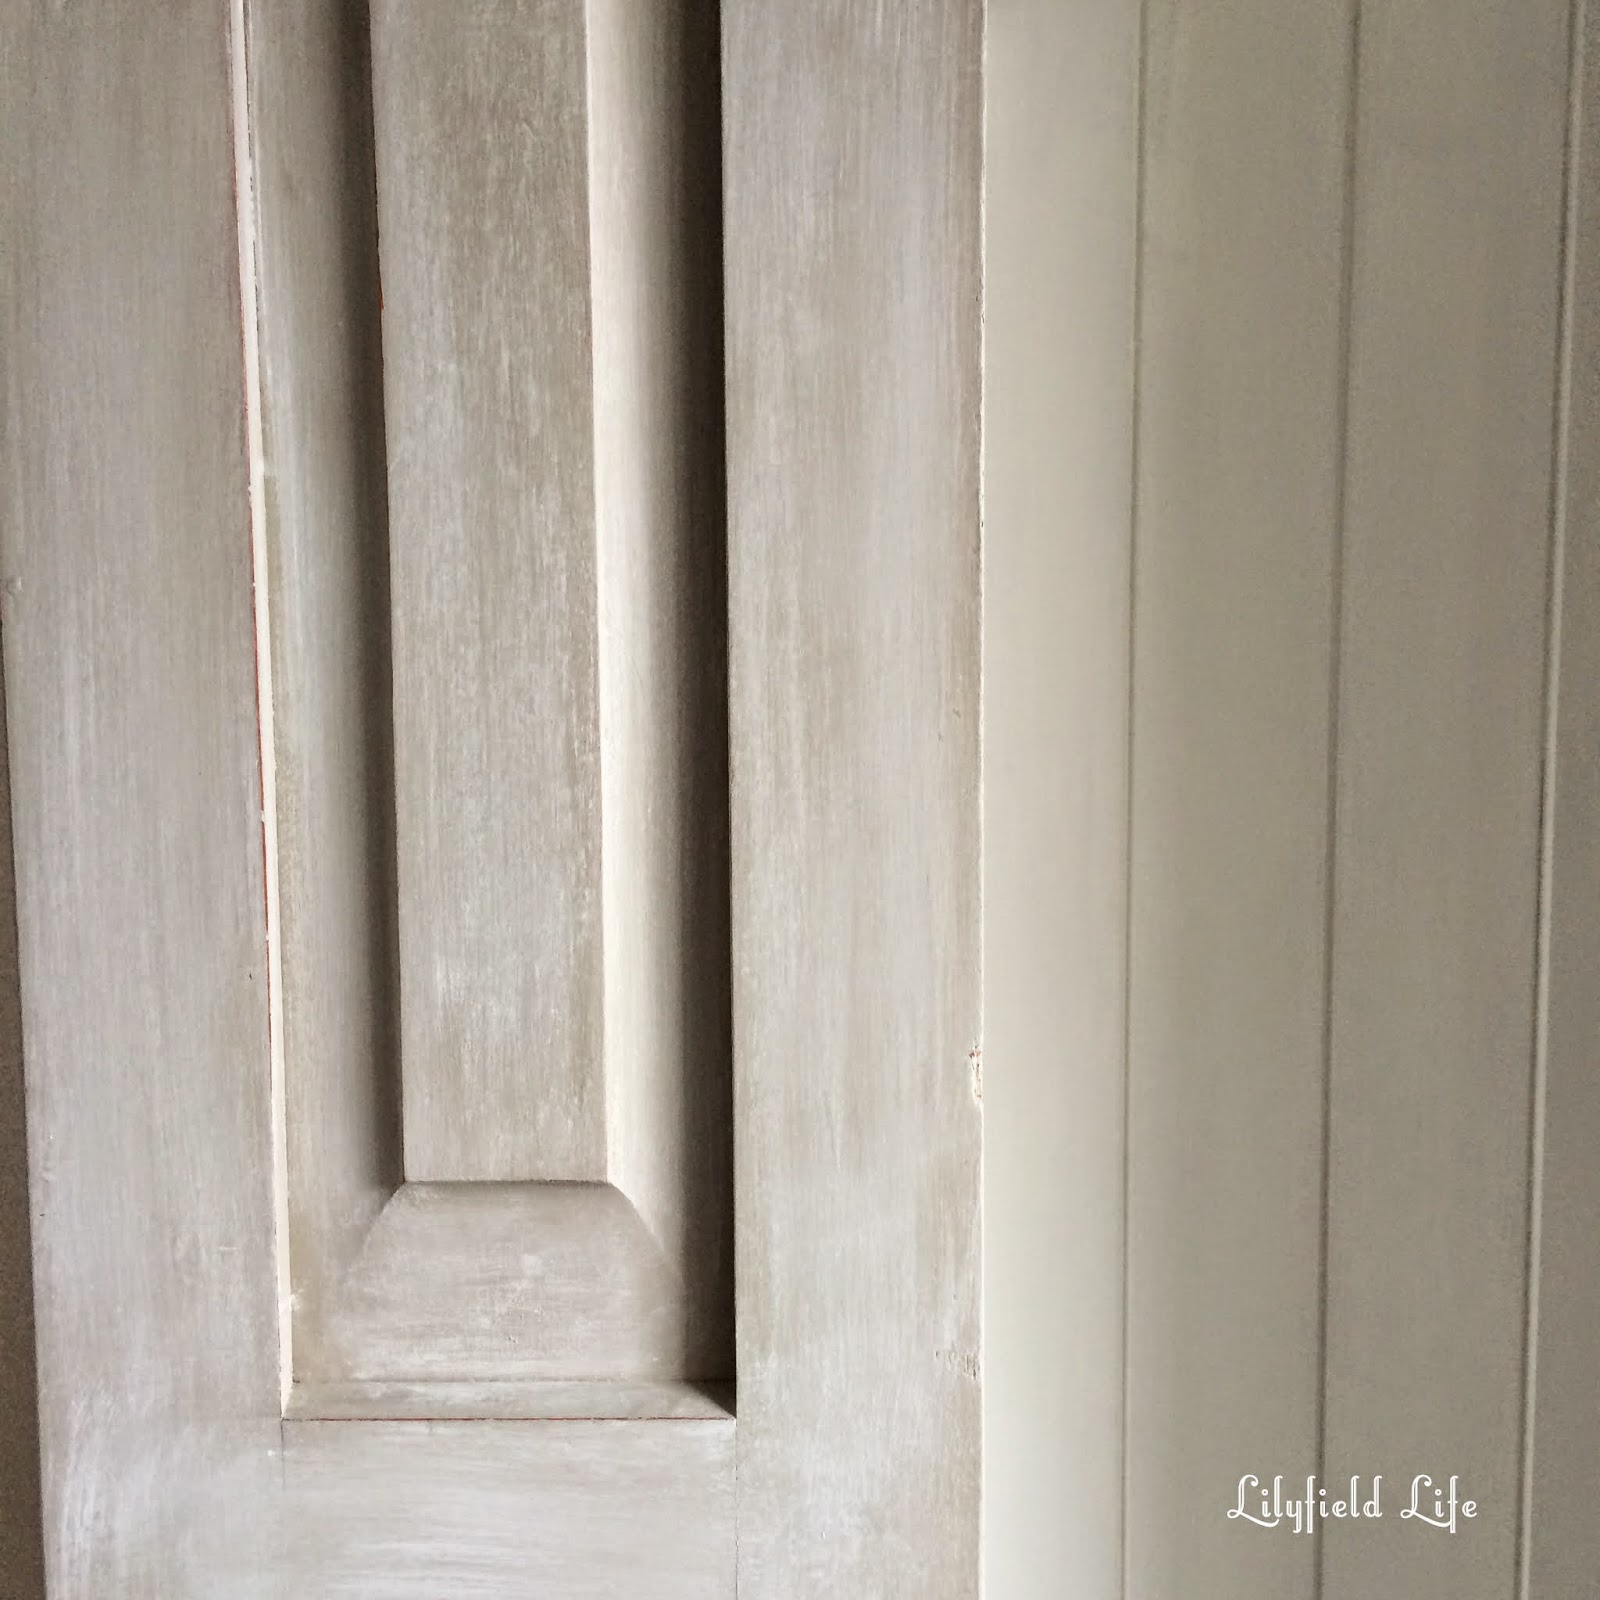 Getting a Restoration Hardware look paint effect with ASCP by Lilyfield Life